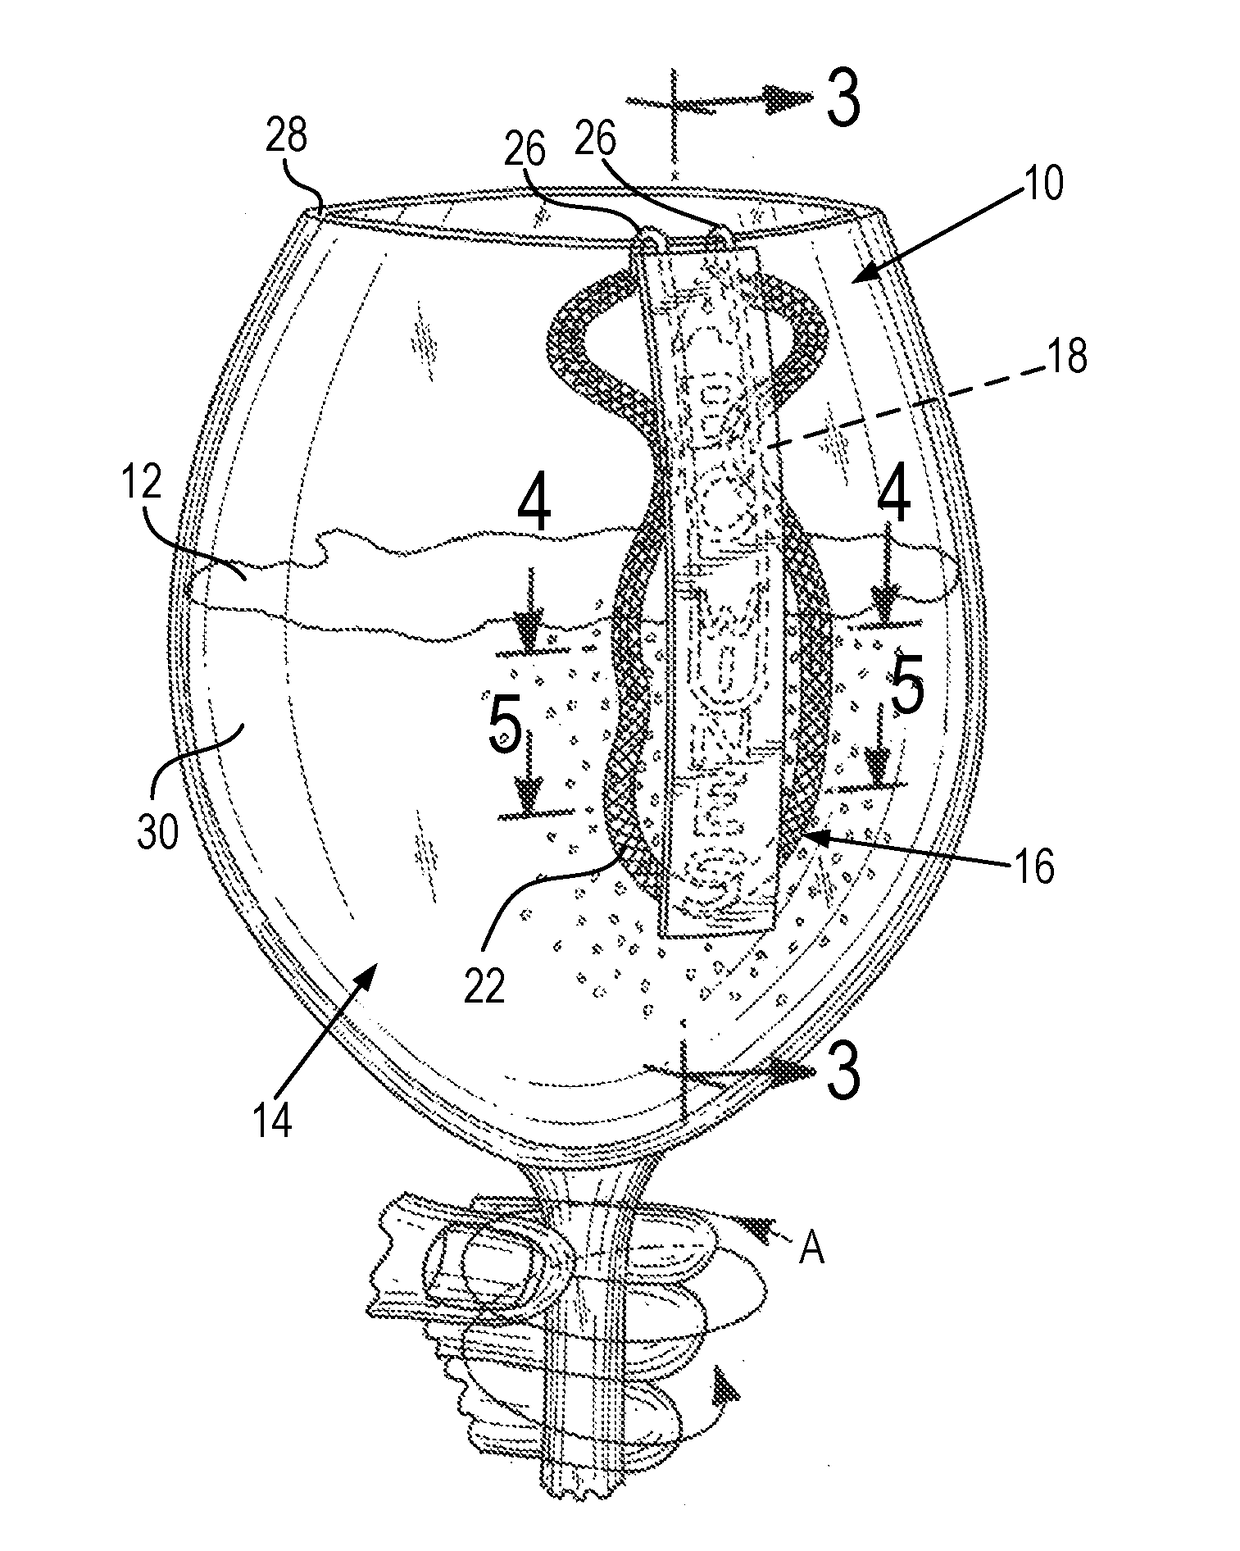 Aerator device for, and method of, aerating a drinkable liquid